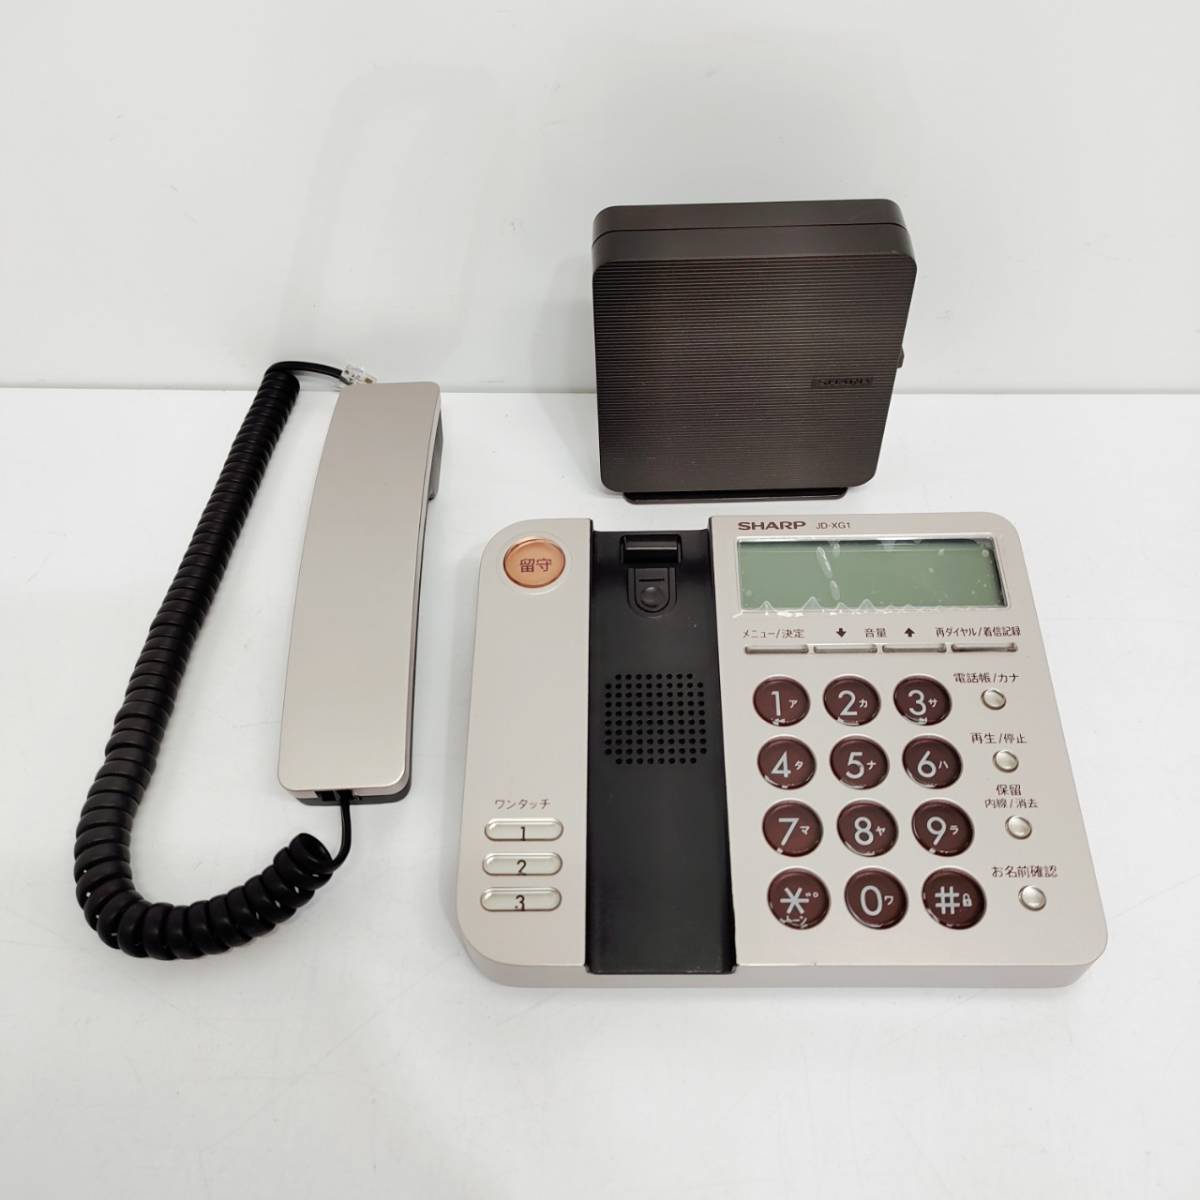 * operation goods sharp JD-KXG1 telephone machine SHARP gold group answer phone with function home use fixation telephone S1450